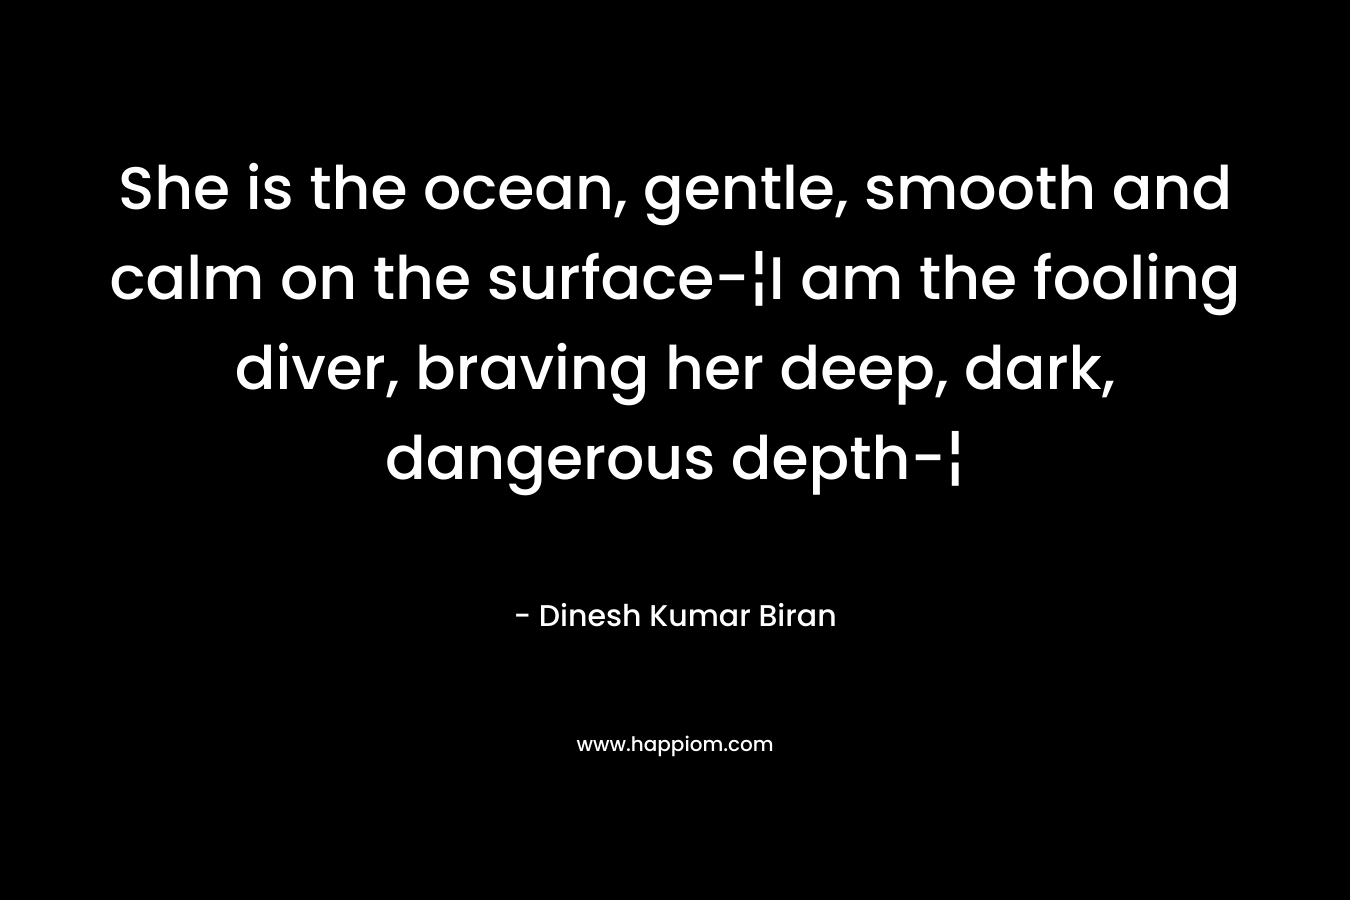 She is the ocean, gentle, smooth and calm on the surface-¦I am the fooling diver, braving her deep, dark, dangerous depth-¦ – Dinesh Kumar Biran